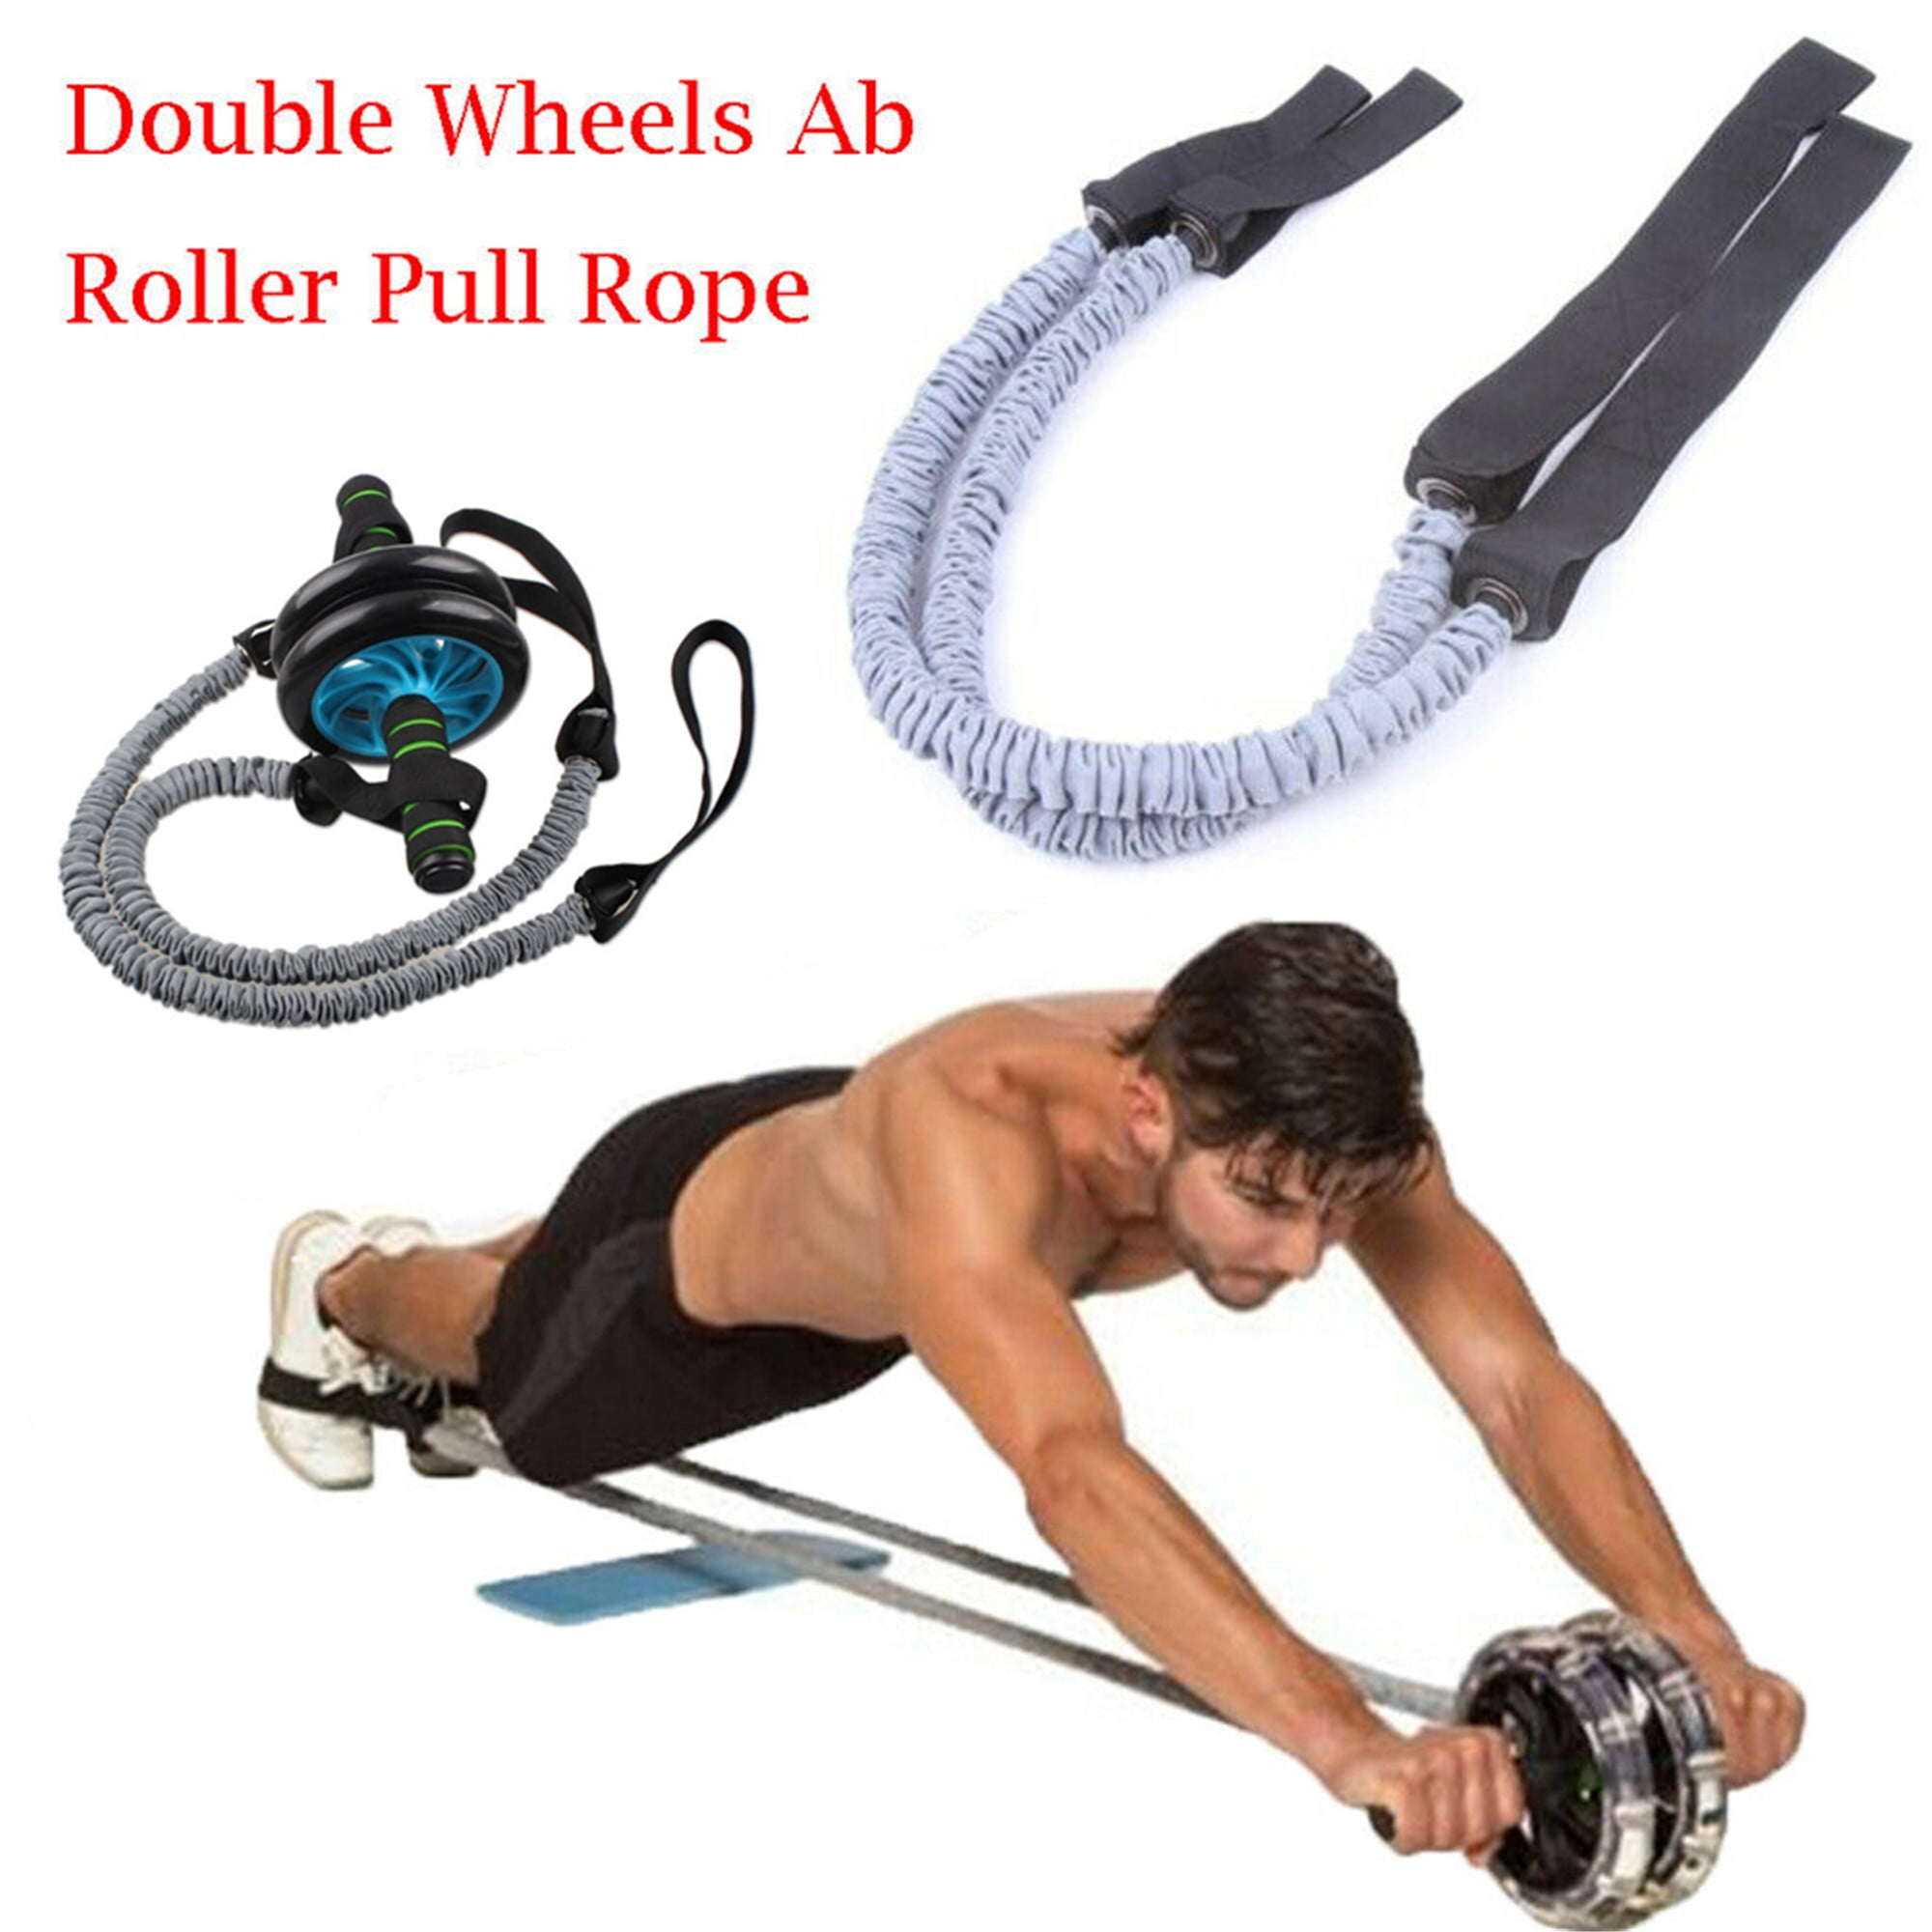 Details about   Muscle training Fitness Workout Gym Abdominal Roller Wheel Resistance Exercise 